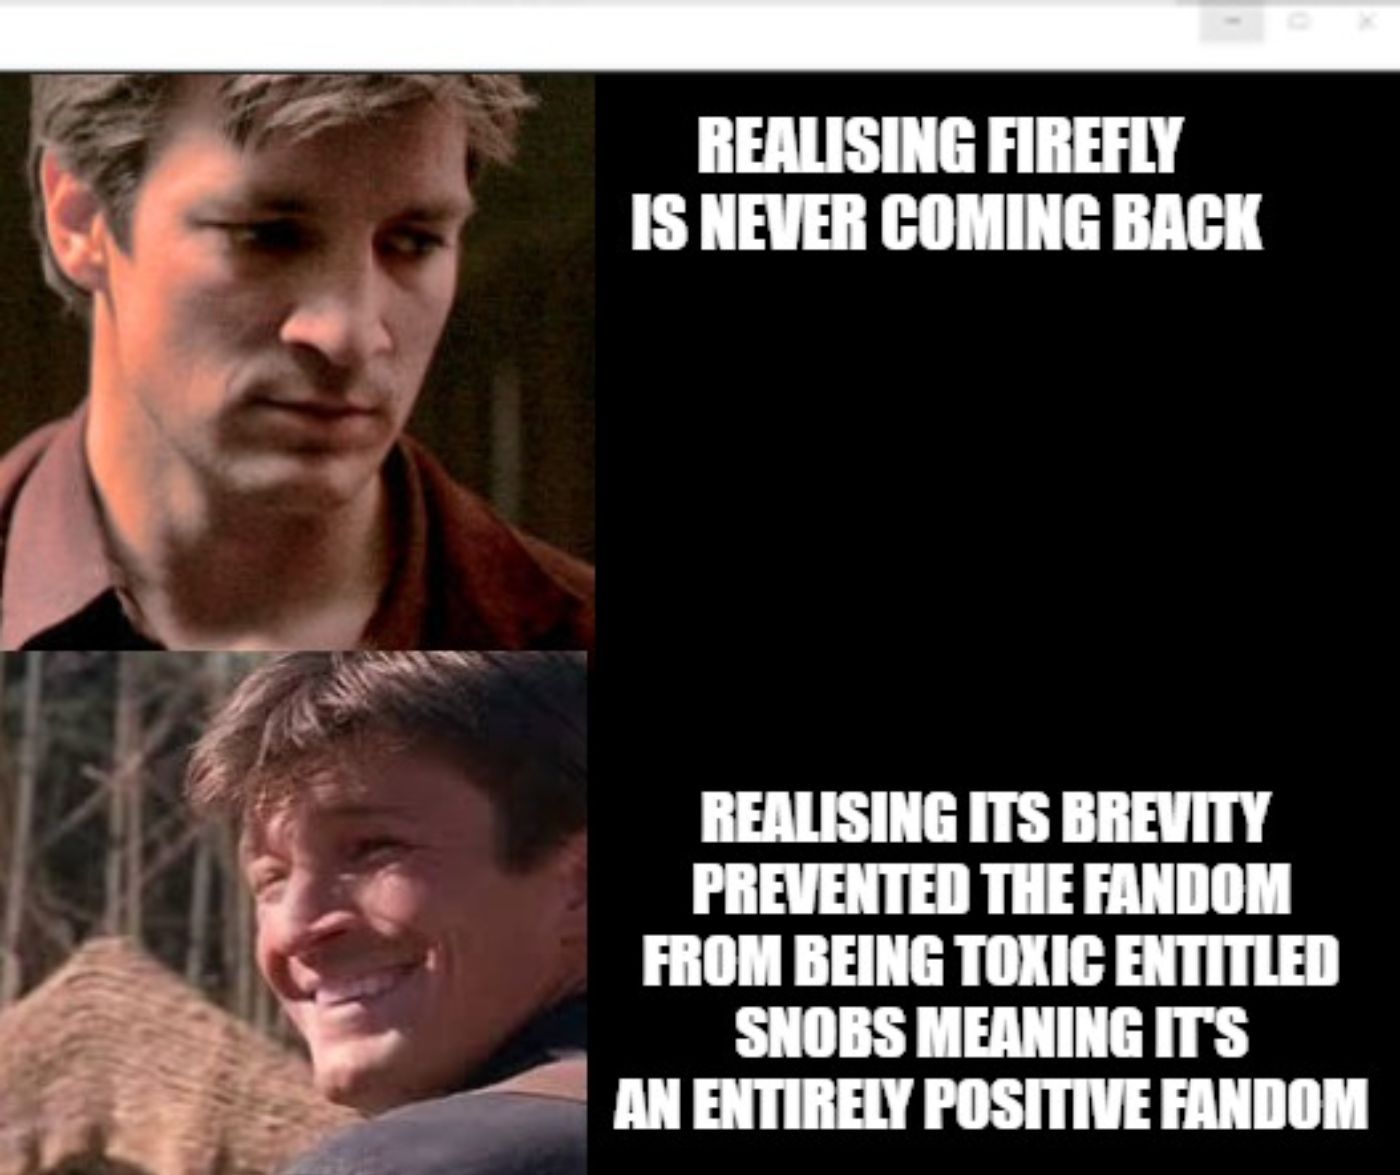 Mal looks sad over Firefly's cancellation, then realizes it will forever be good as a result